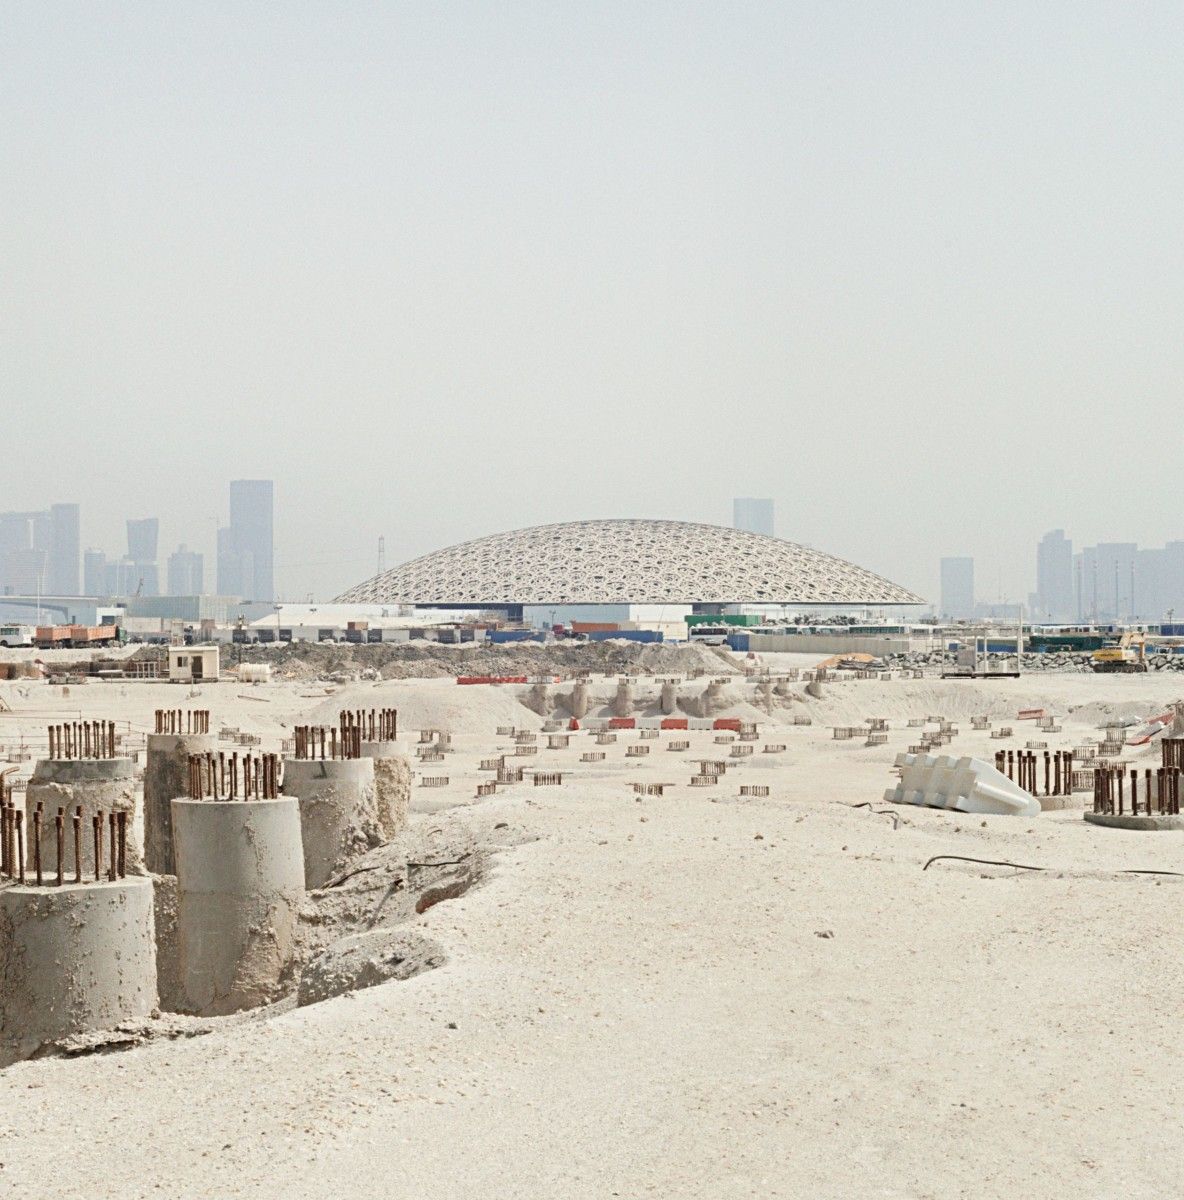 The Louvre Abu Dhabi dome and the site of the Guggenheim’s troubled project. Image by Knut Egil Wang. UAE, 2016.